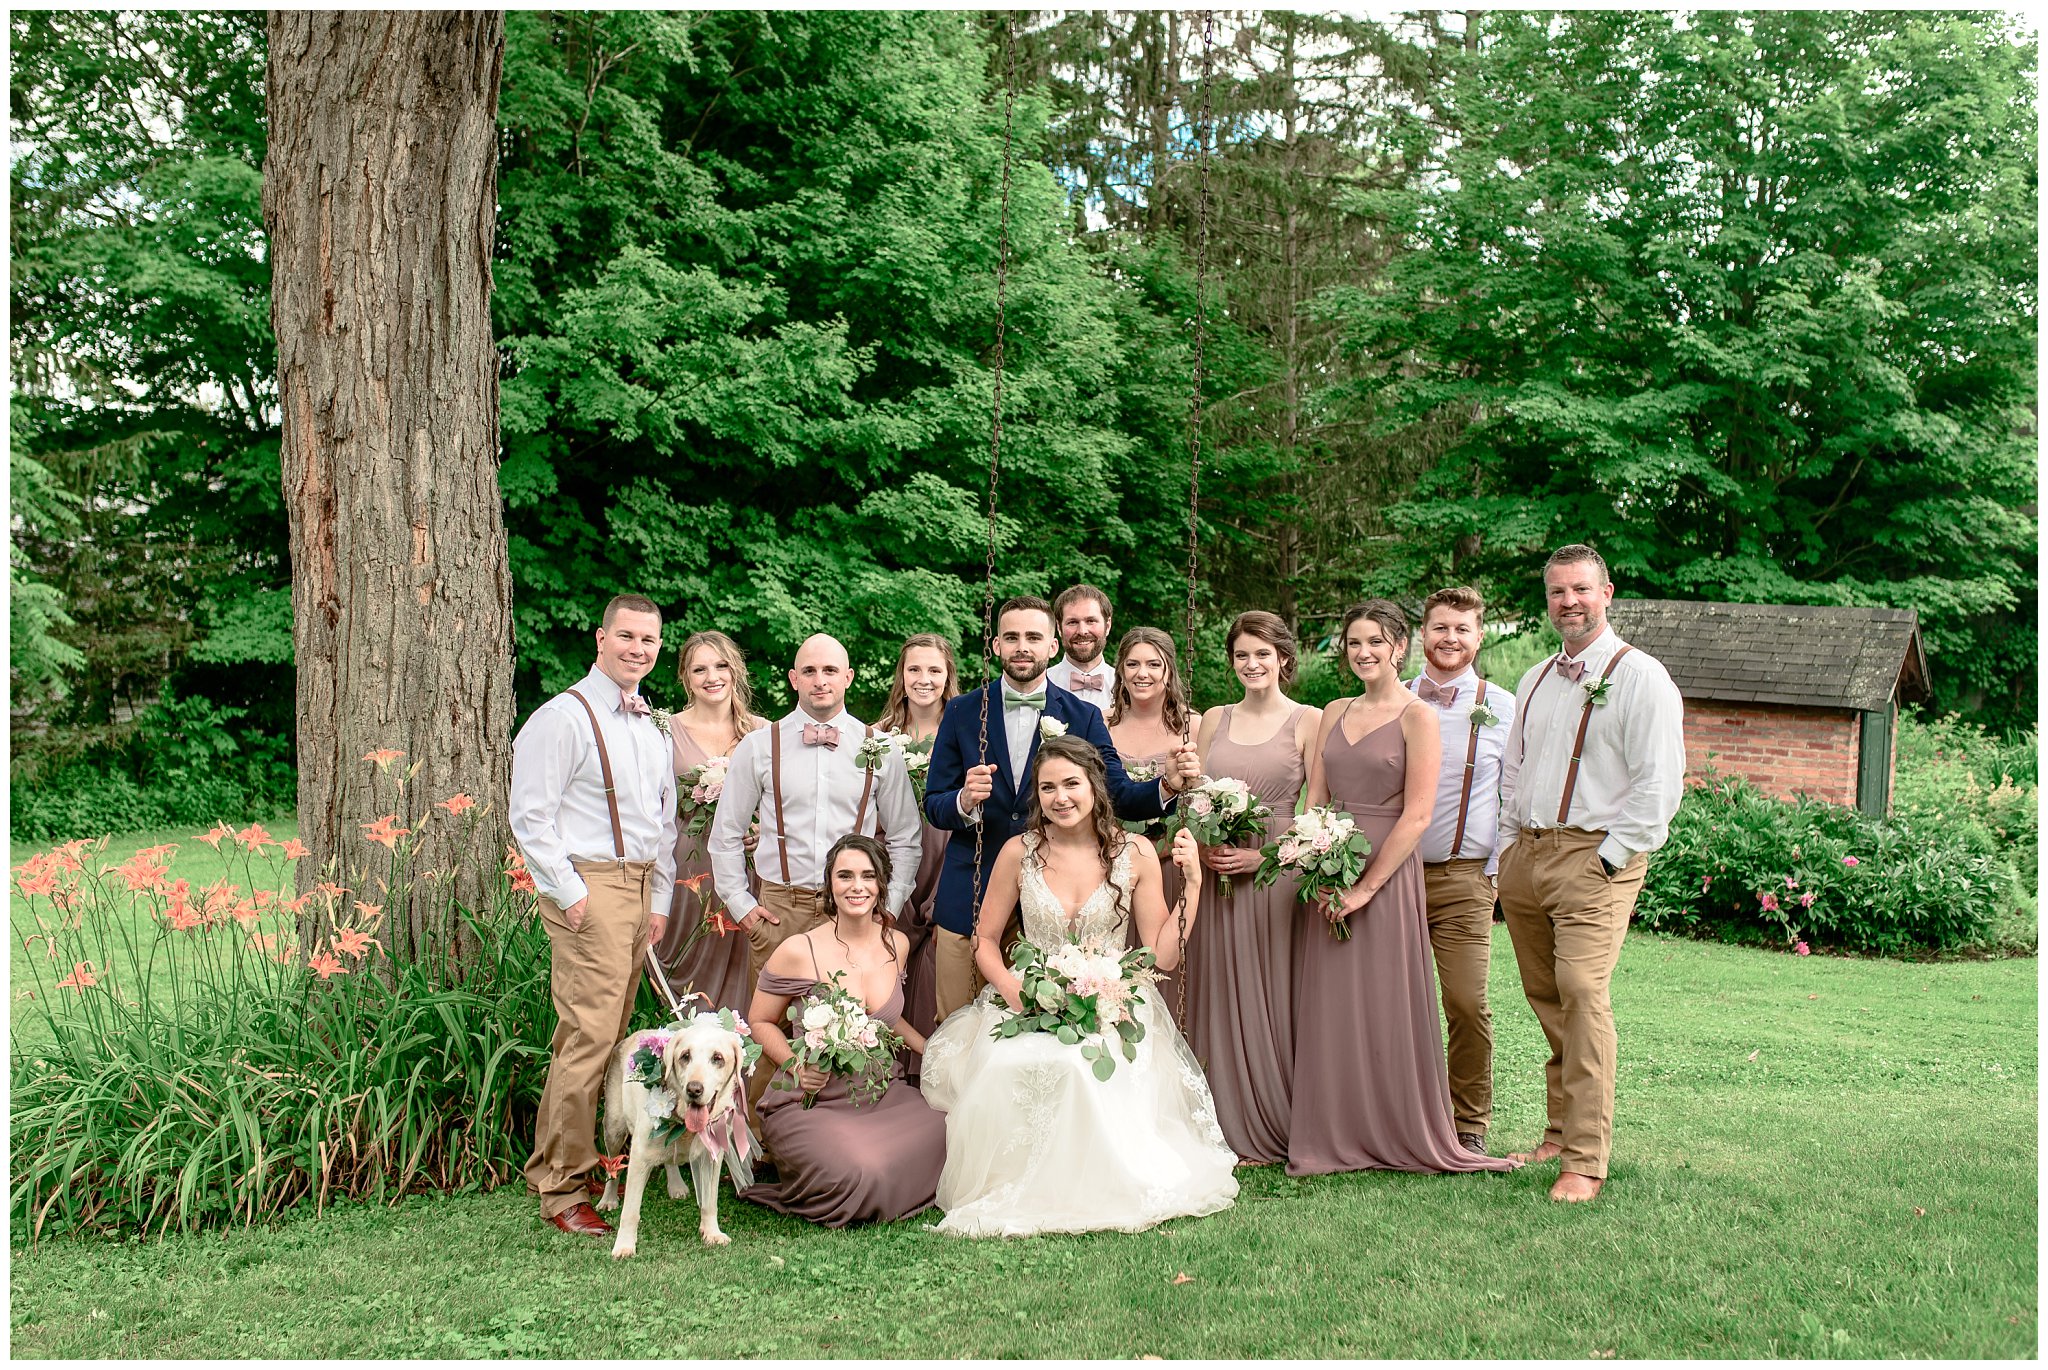 Dale and Hayley,Joanna Young Photography,Our Farm,Syracuse,Wedding Photographer,